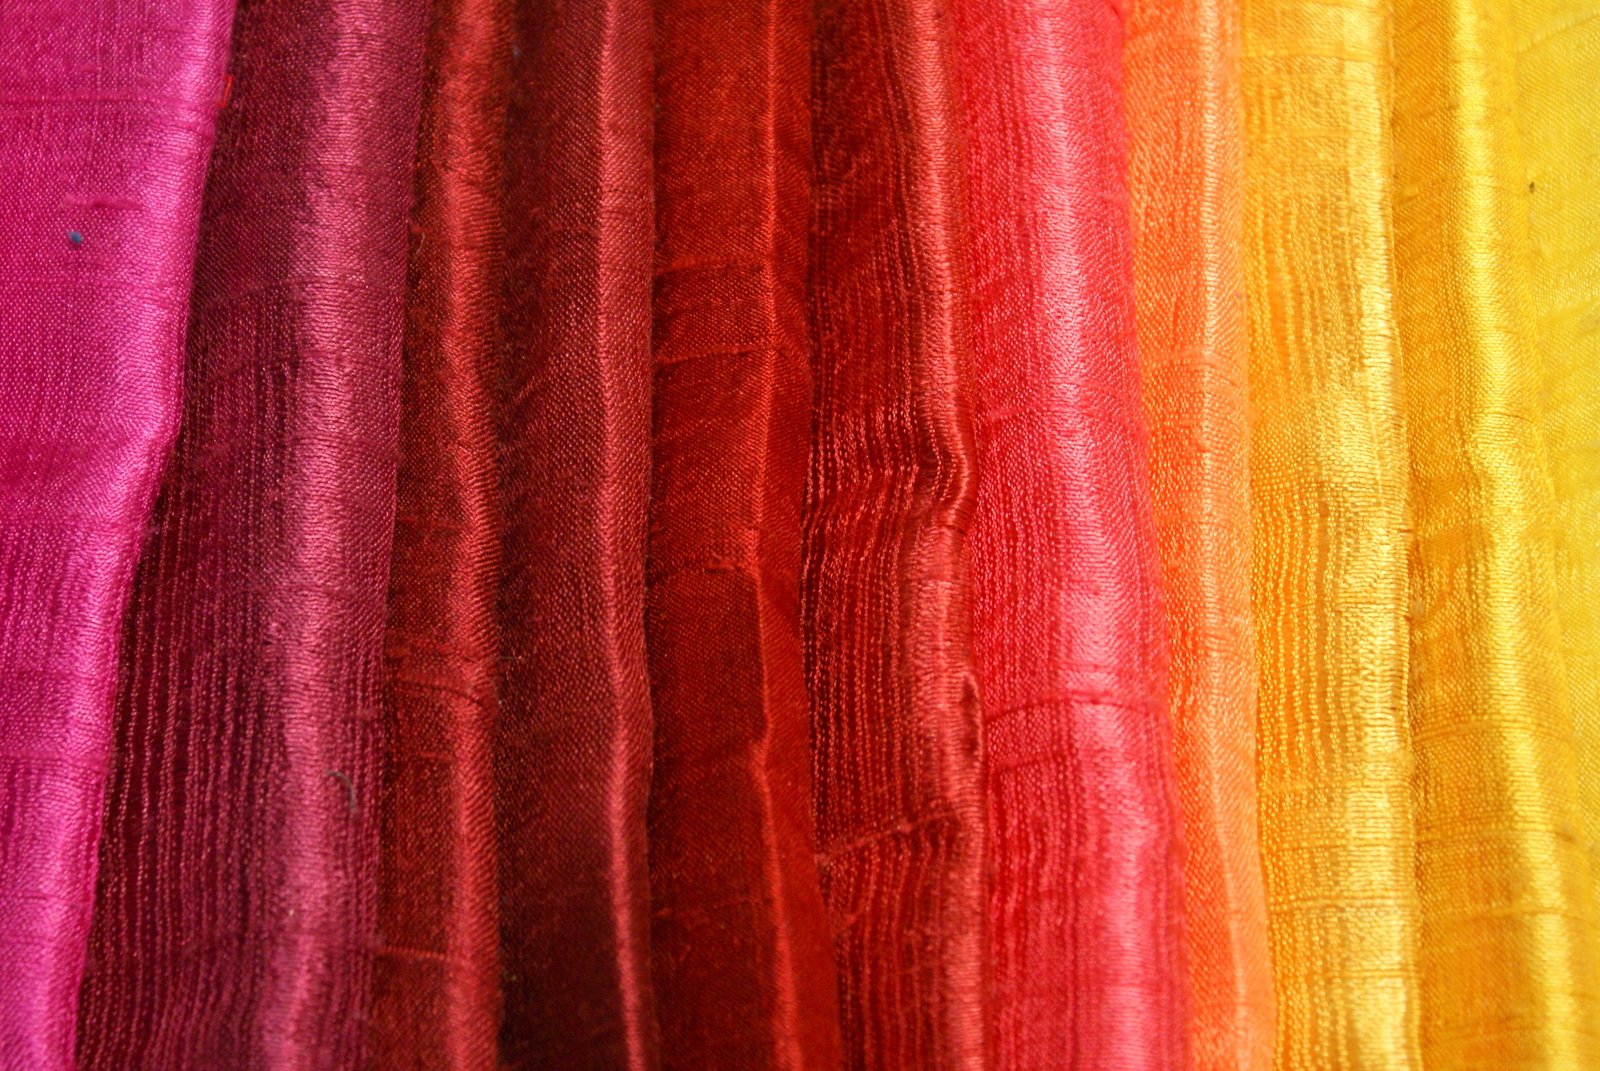 a group of colored sheets with a close up po of one of the curtains